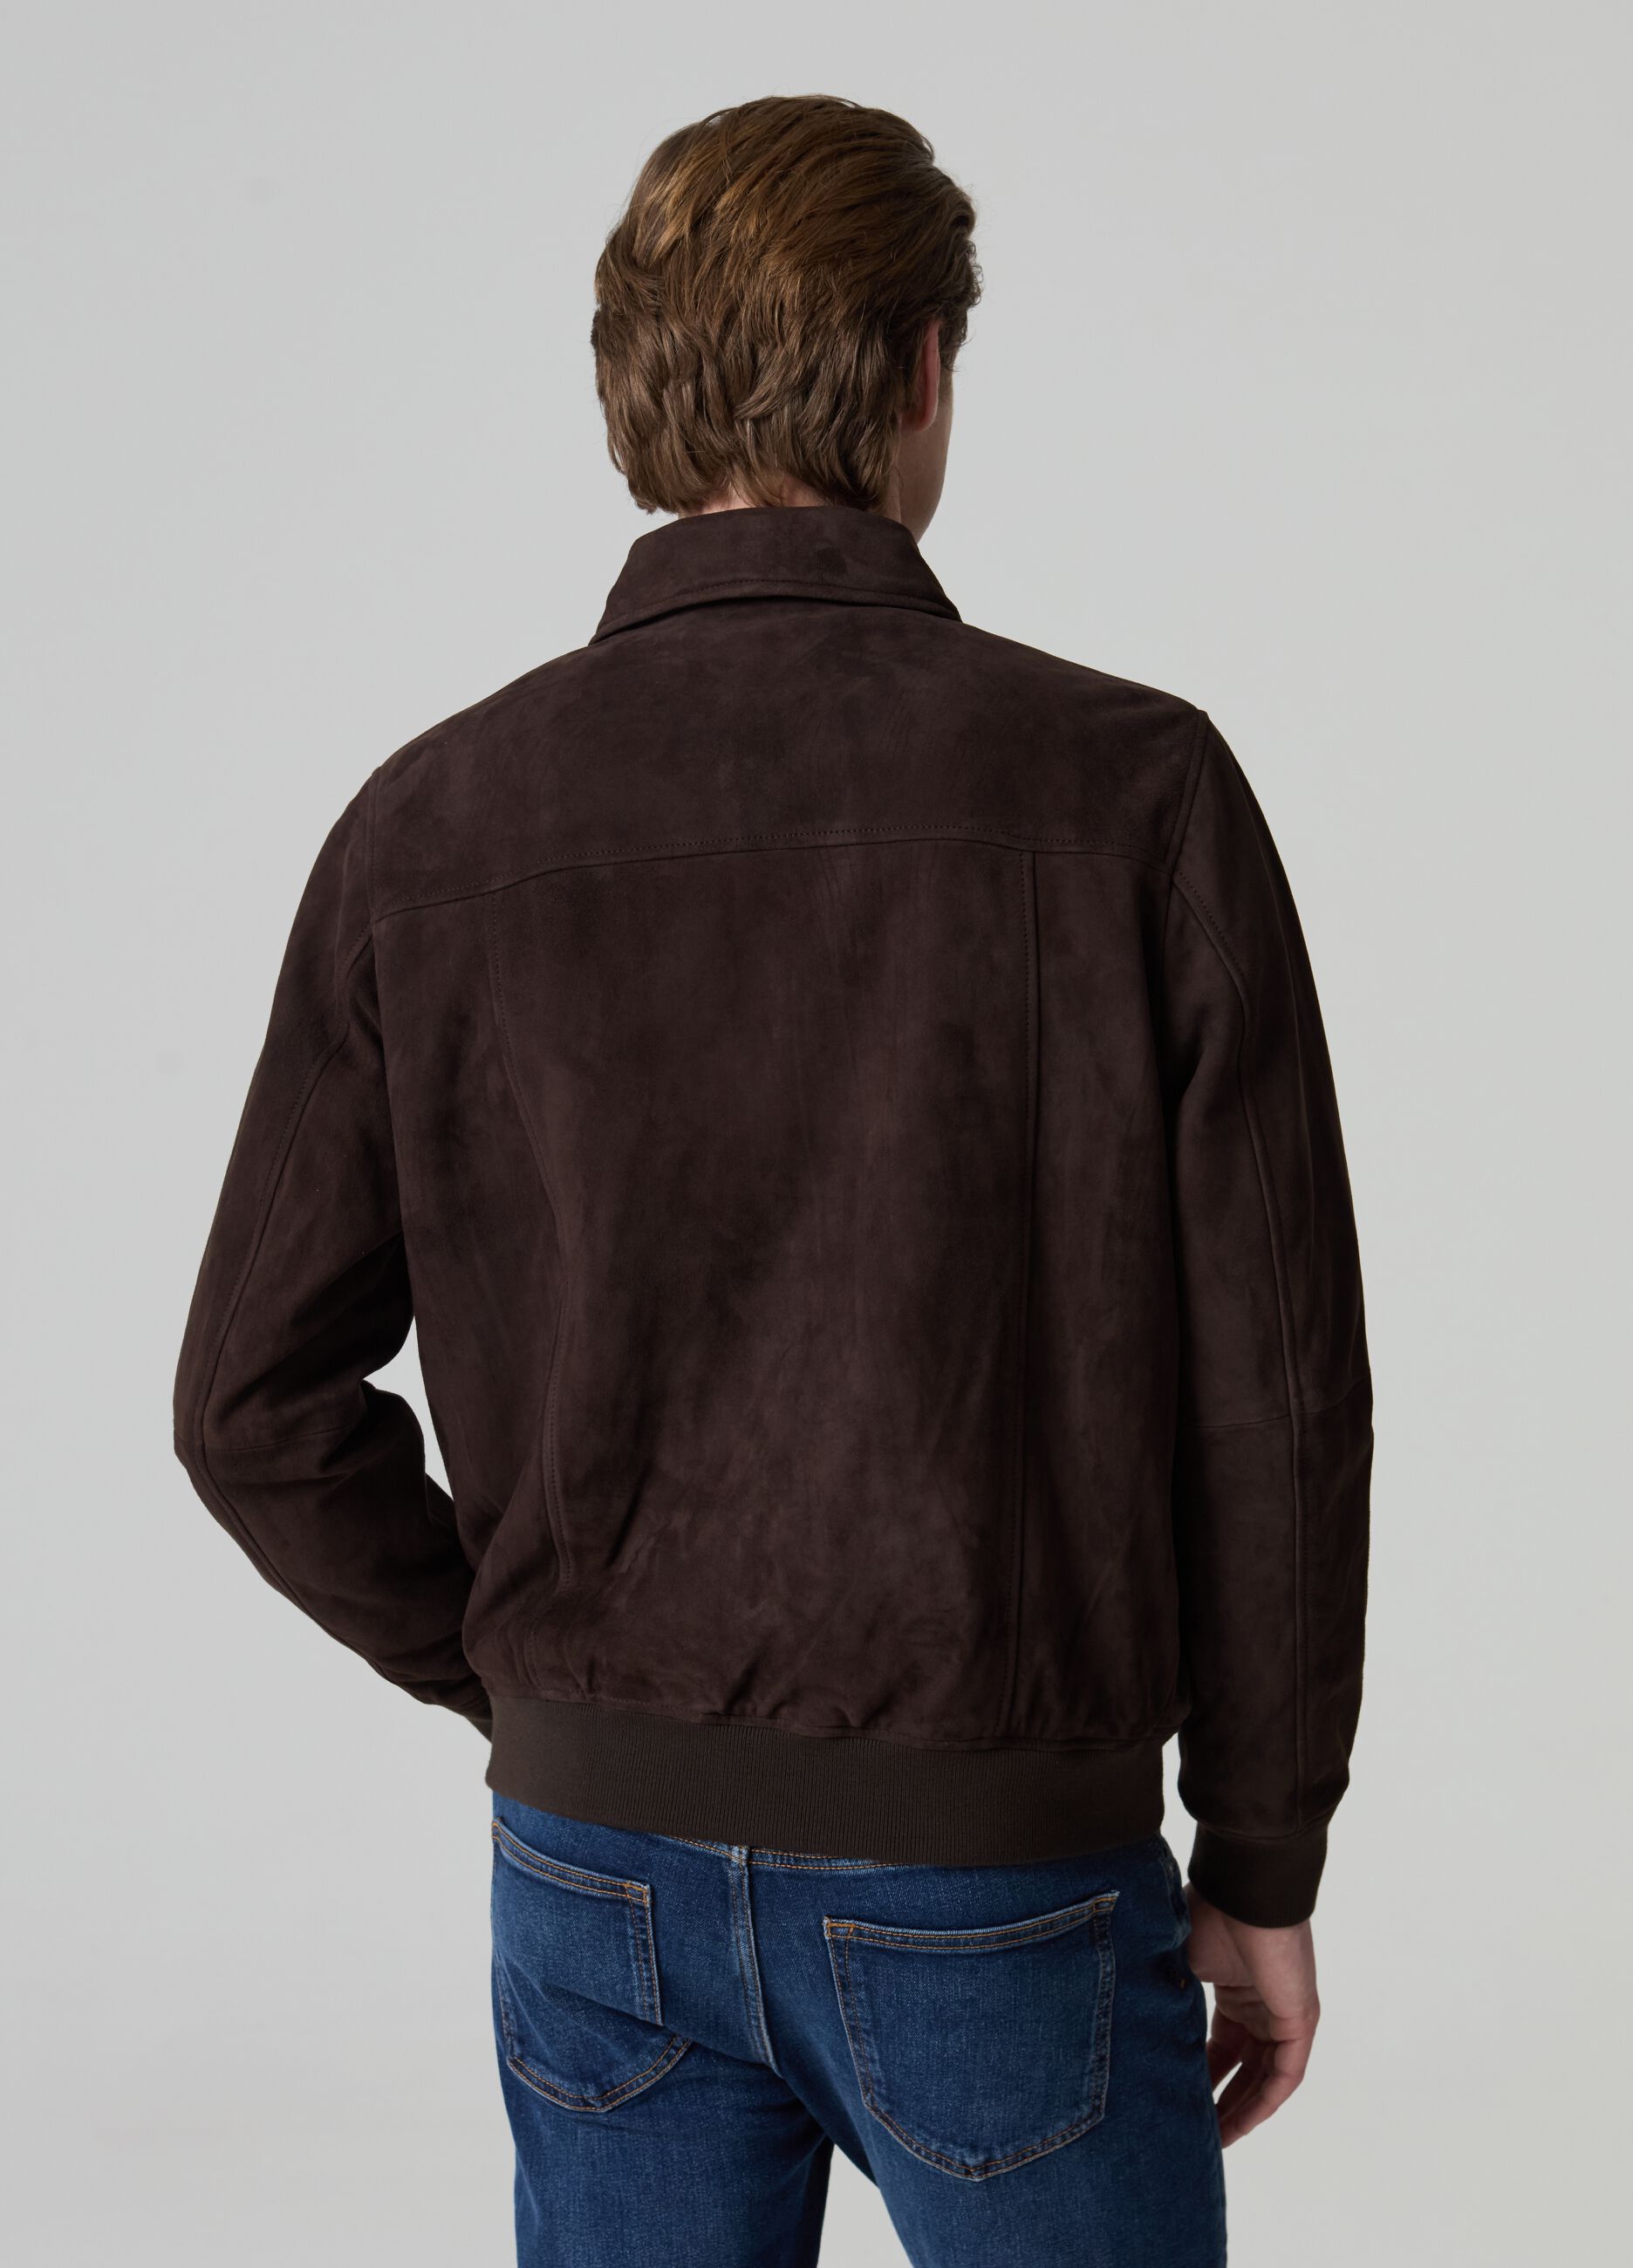 Short suede jacket with collar and zip